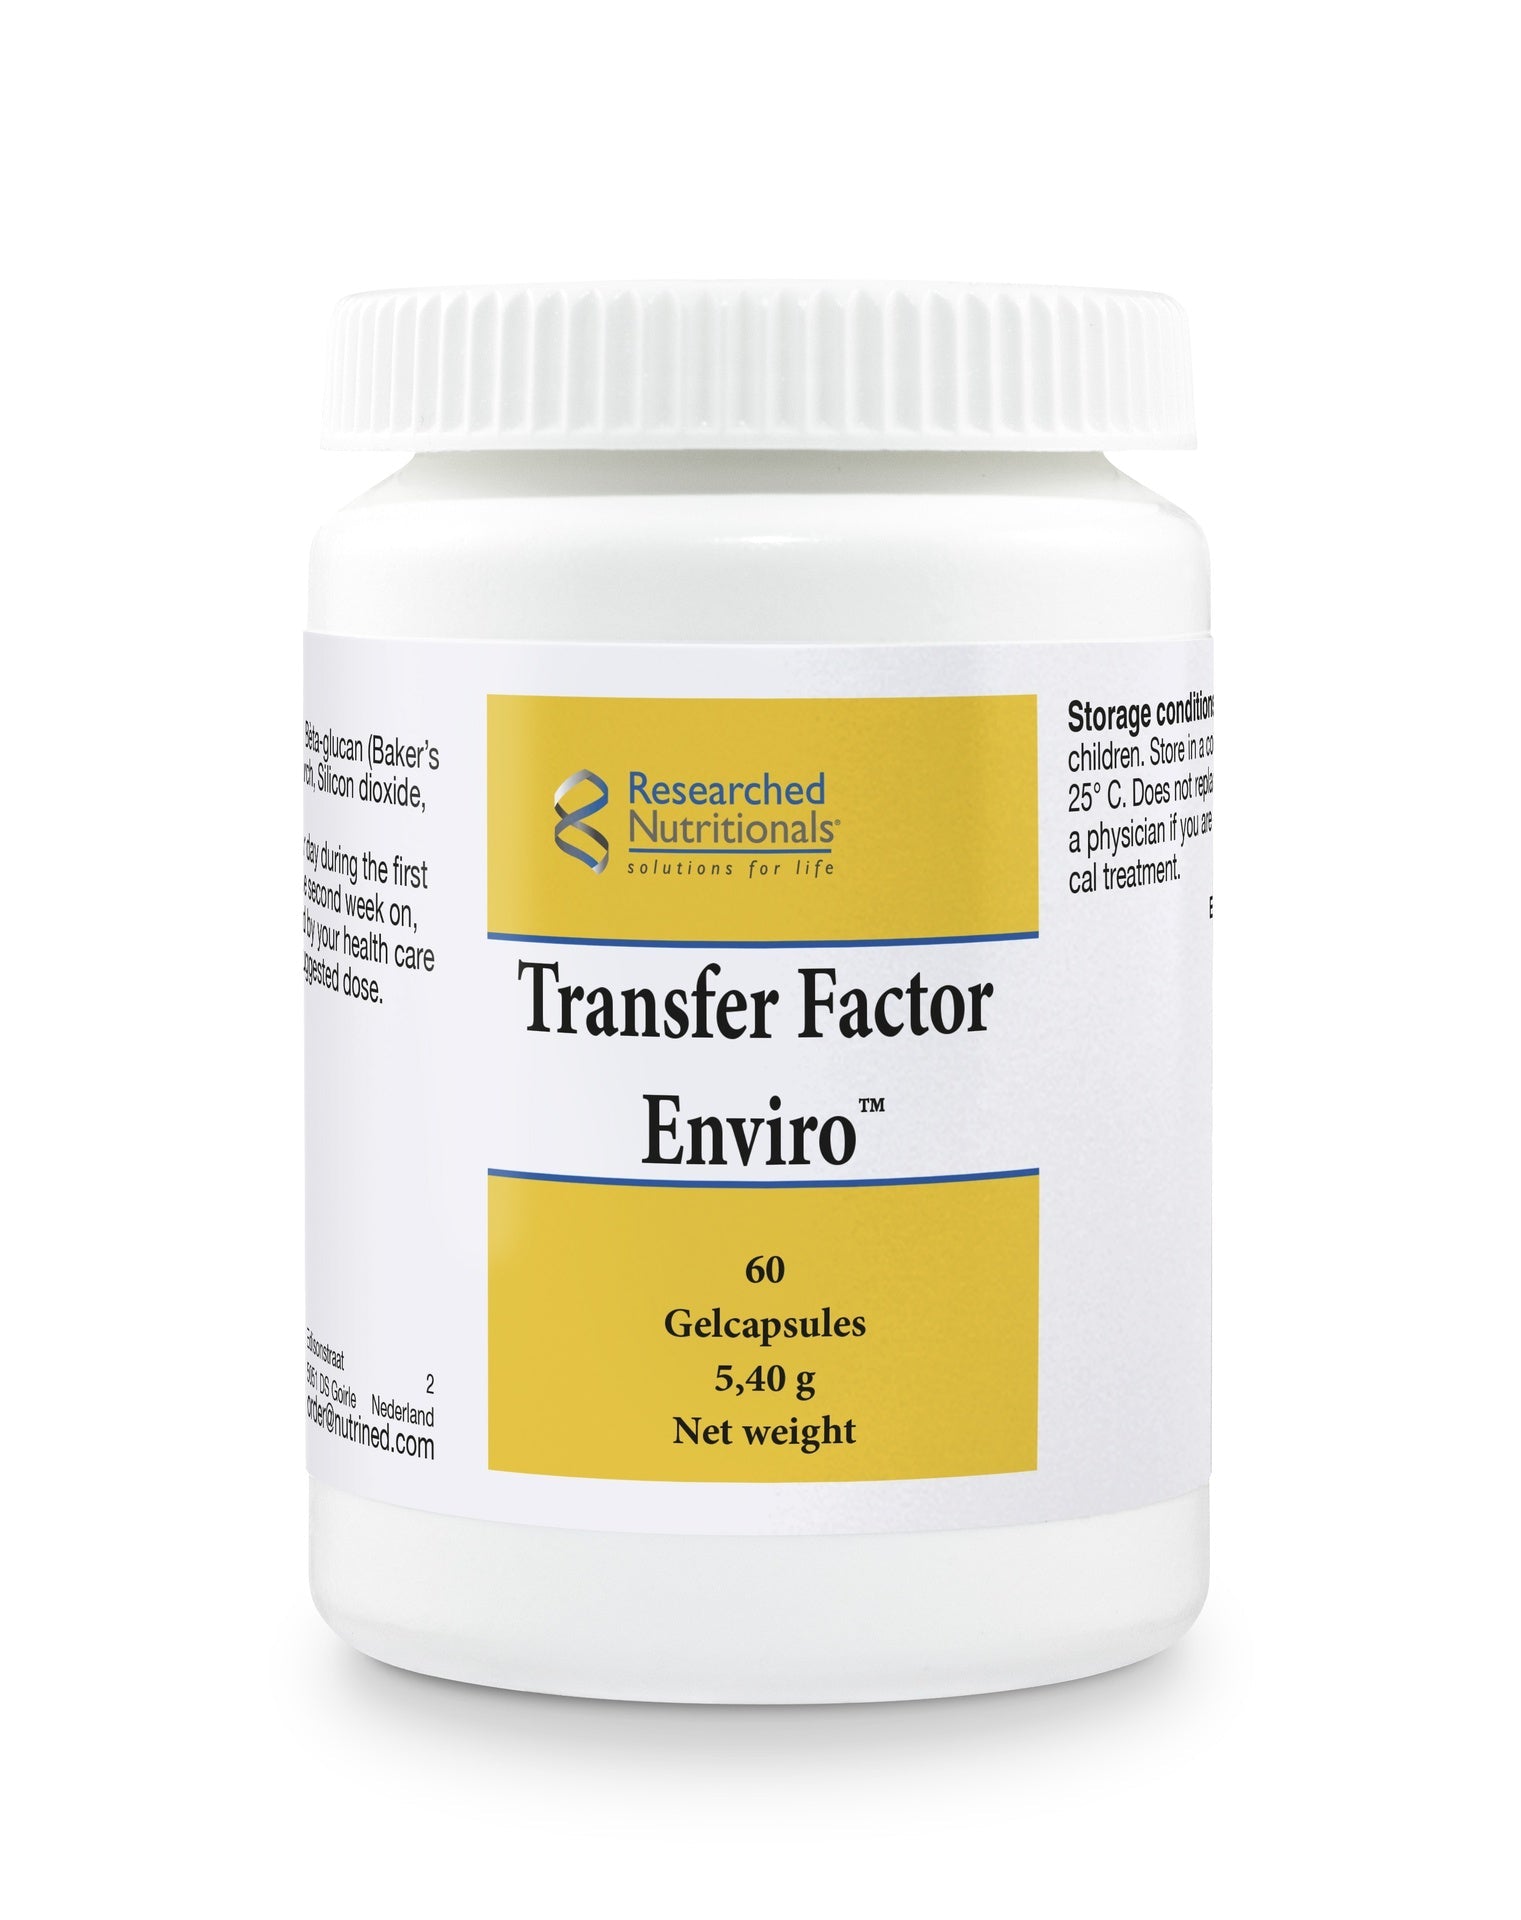 Transfer Factor Enviro - 60 Capsules | Researched Nutritionals